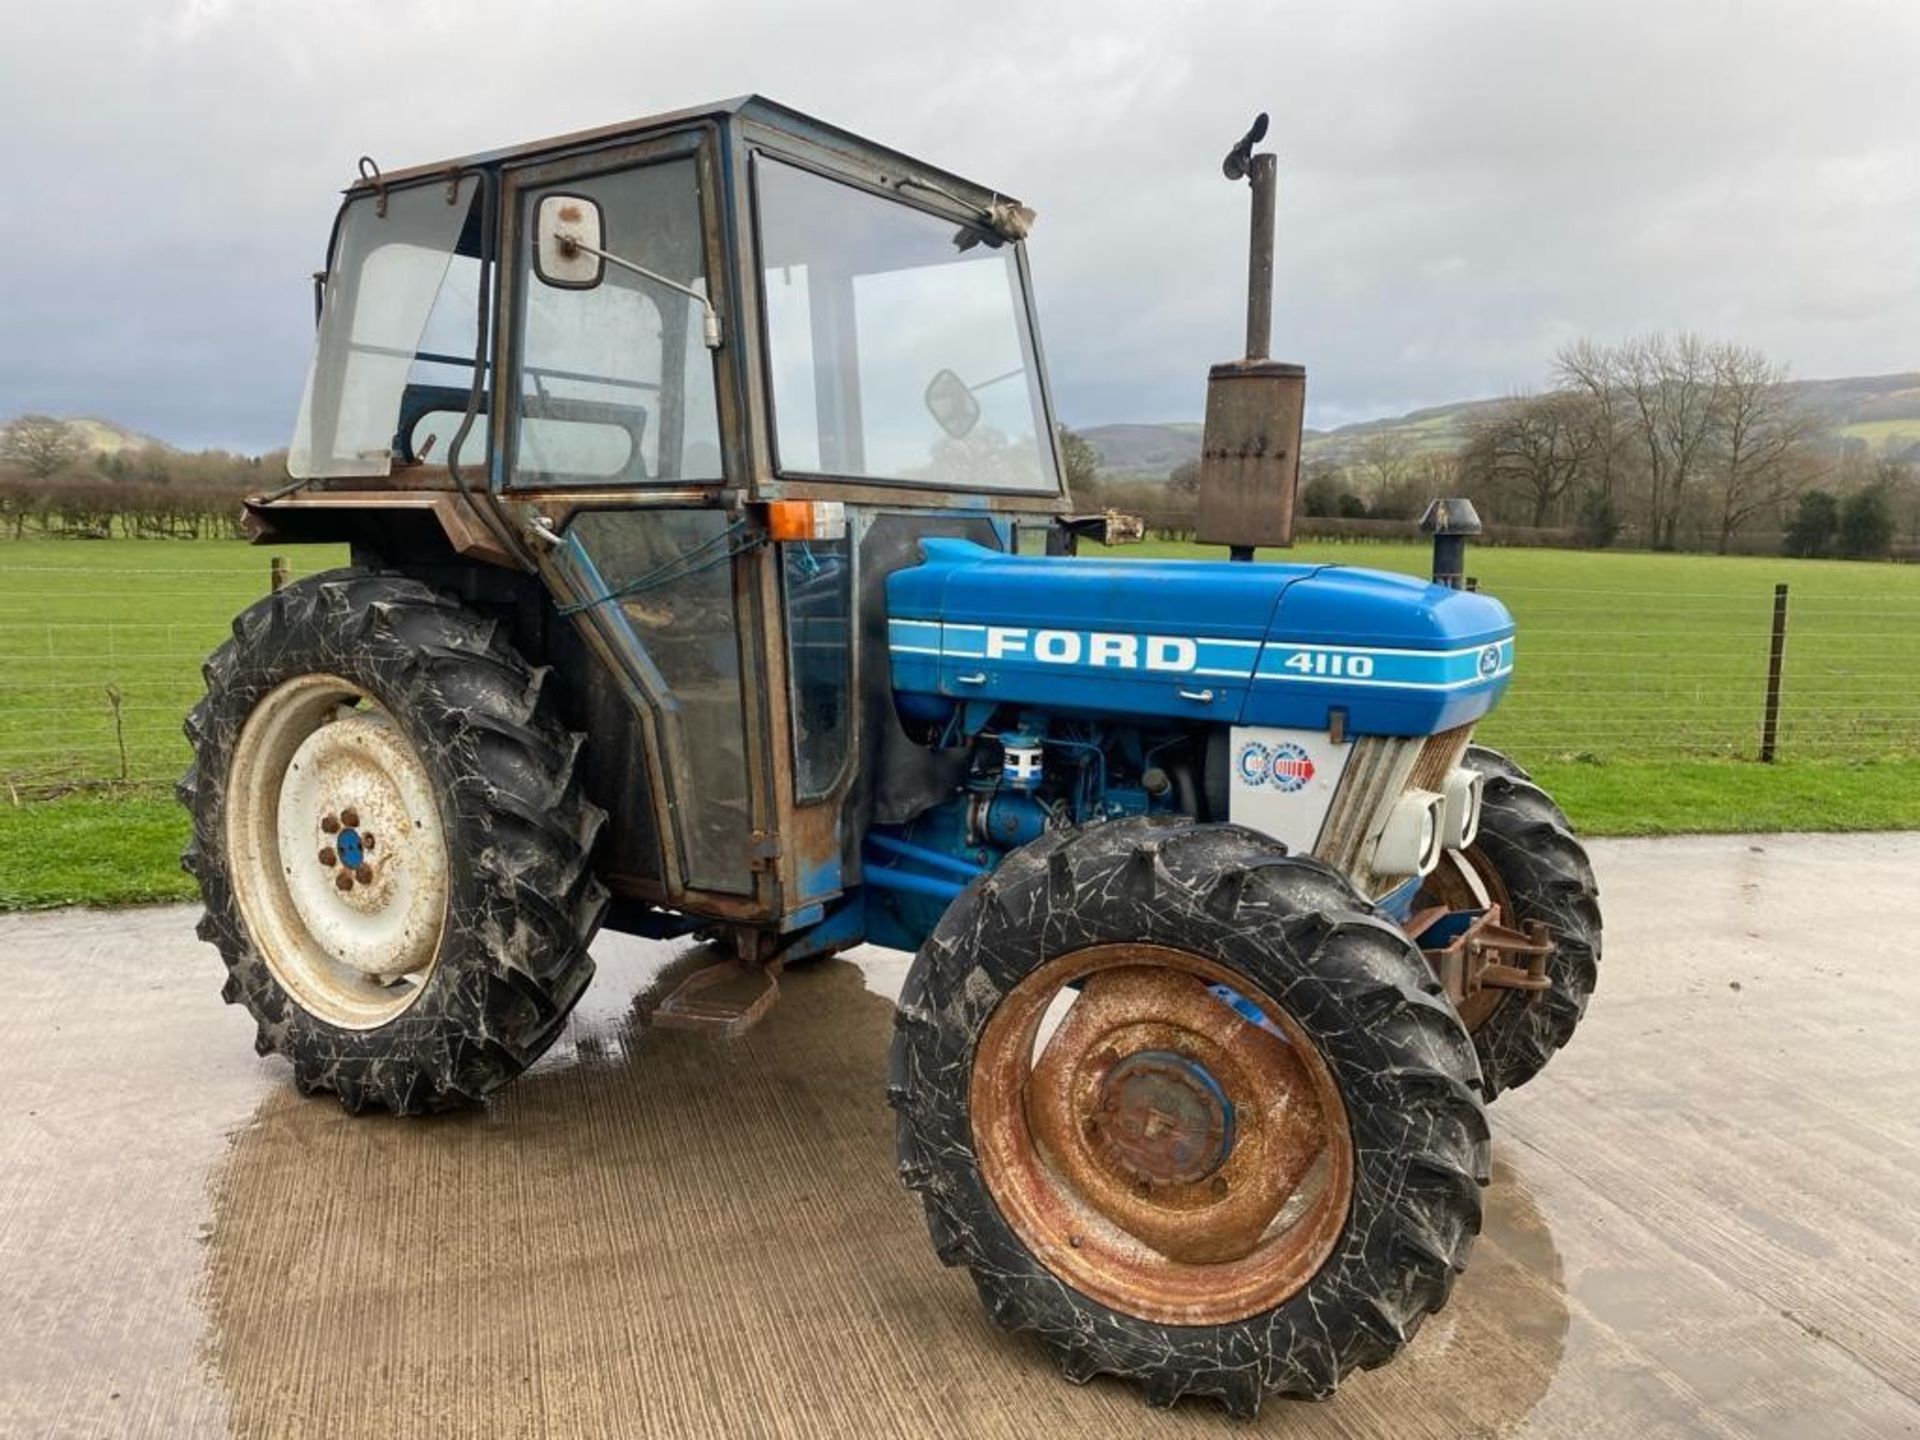 1982 FORD 4110 TRACTOR - Image 3 of 18